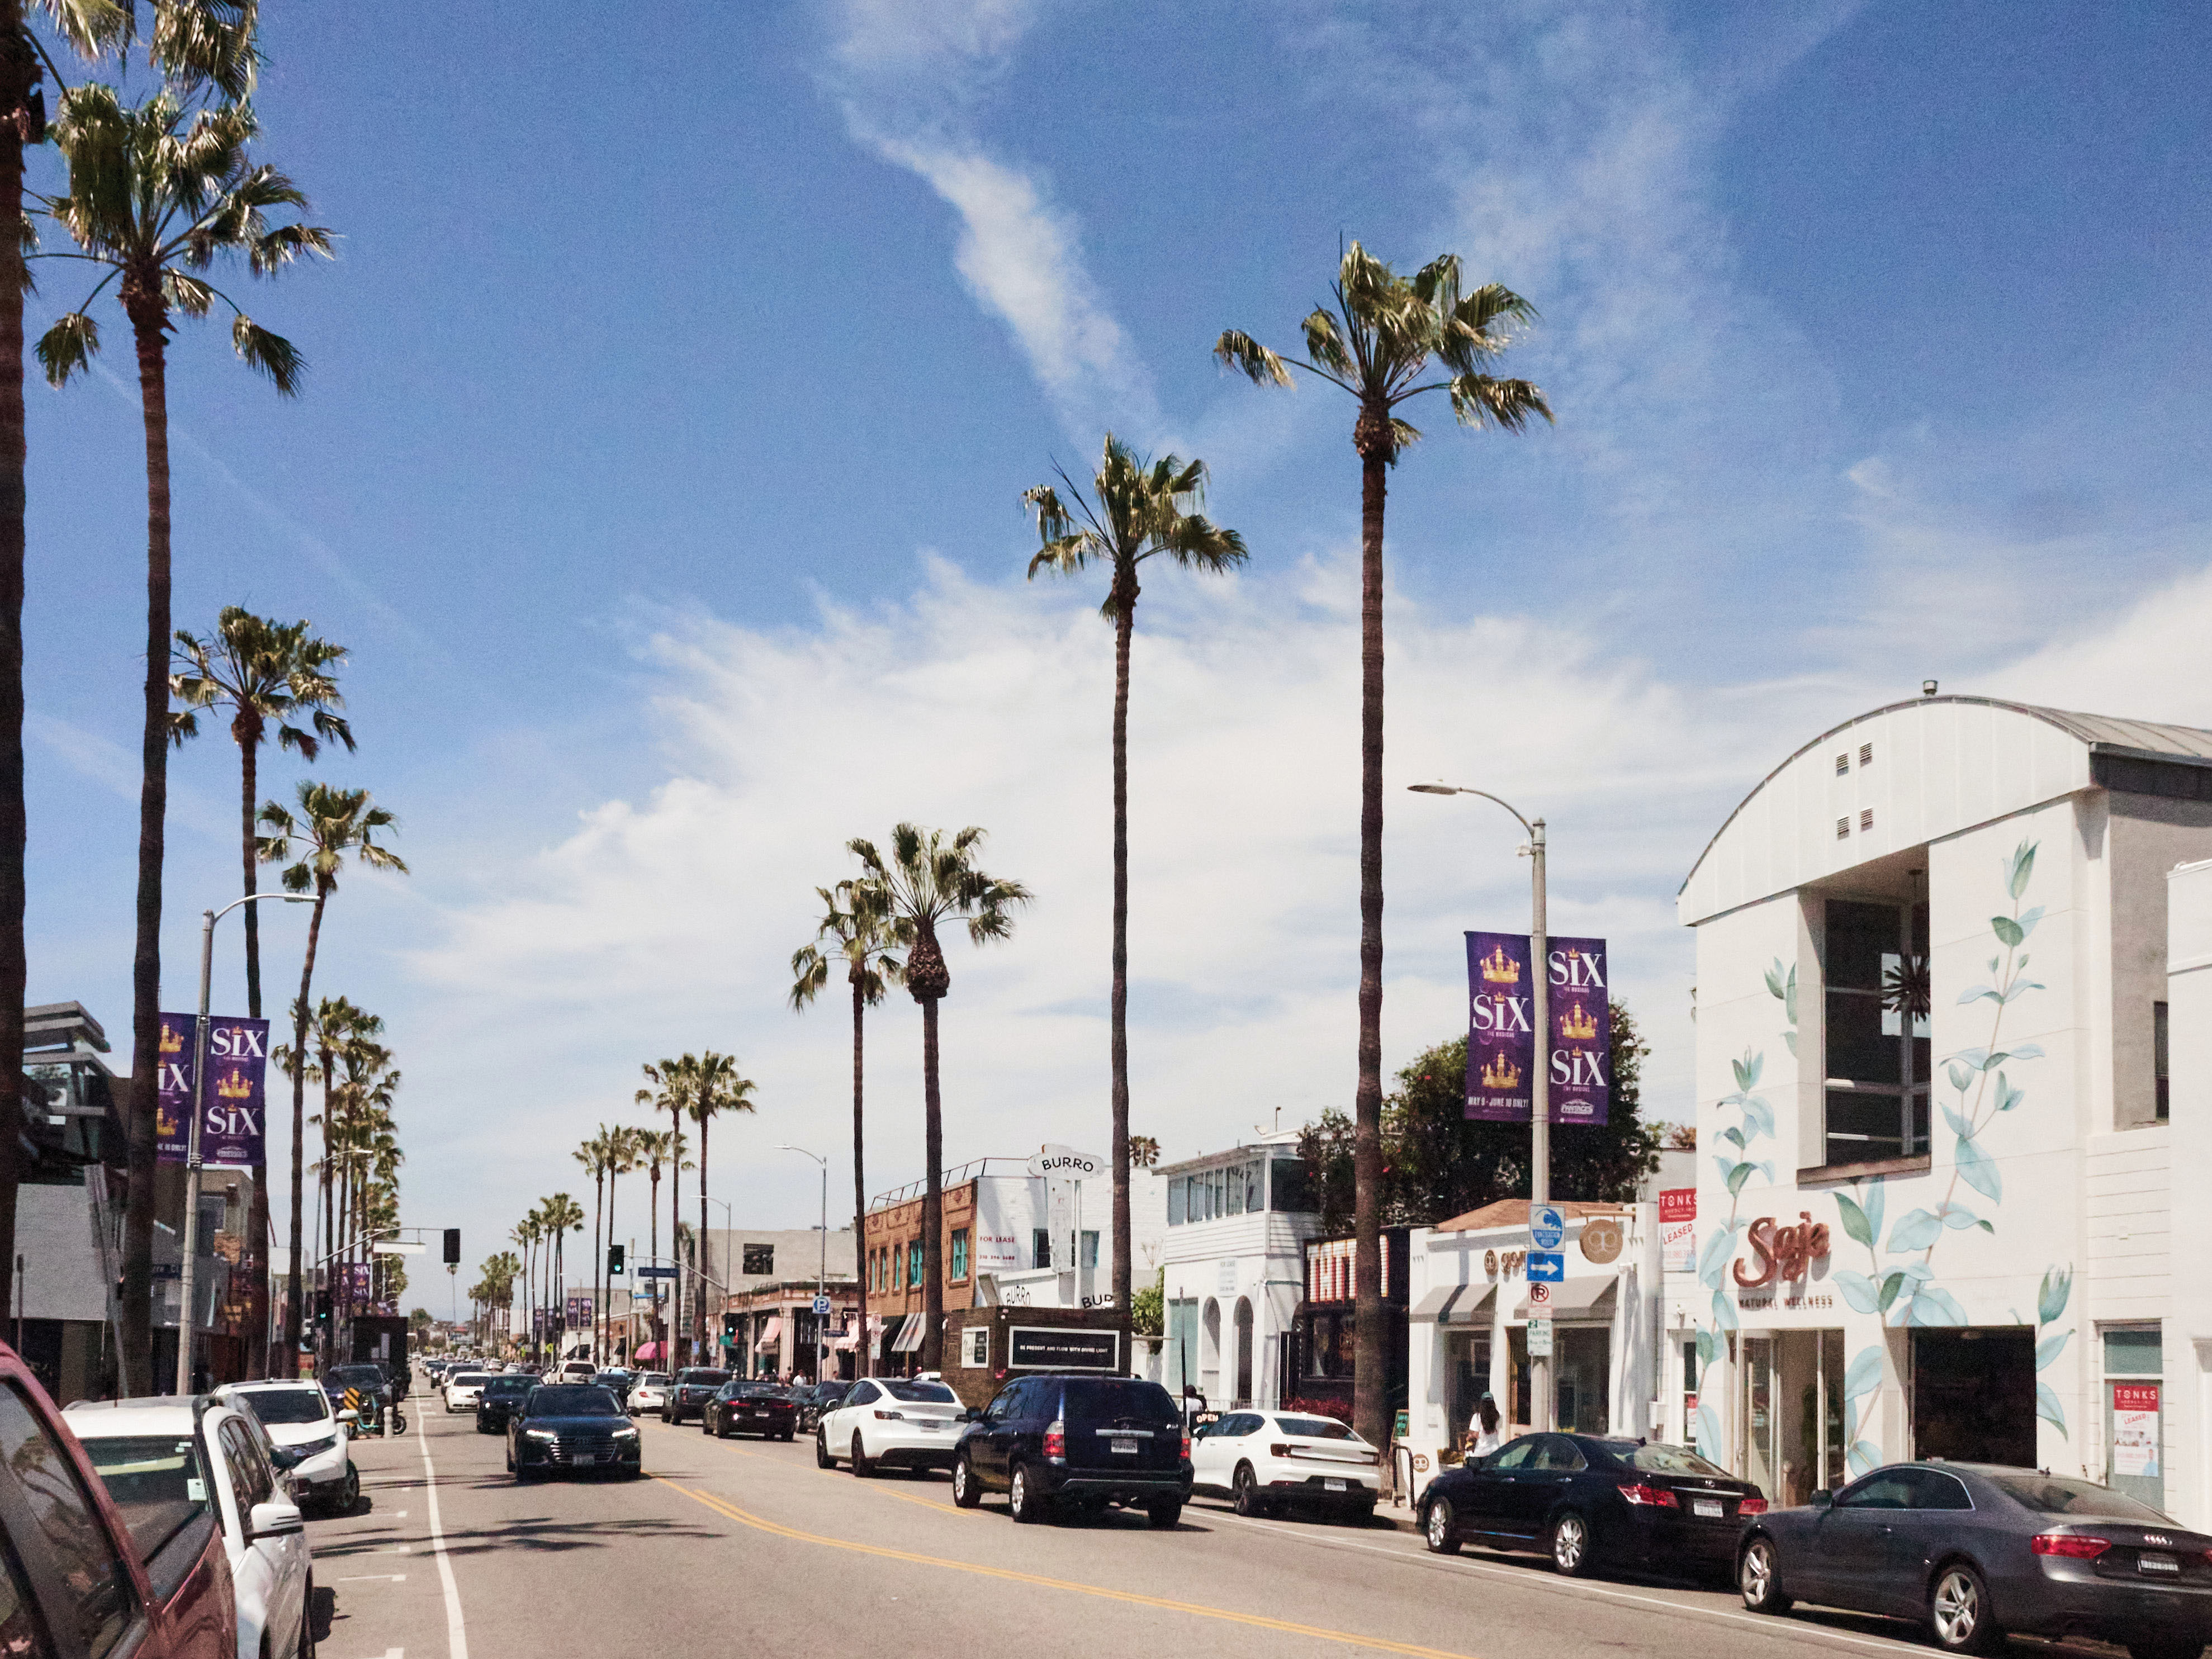 A lineup of shops and palms along busy Abbott Kinney Boulevard in Venice Beach.